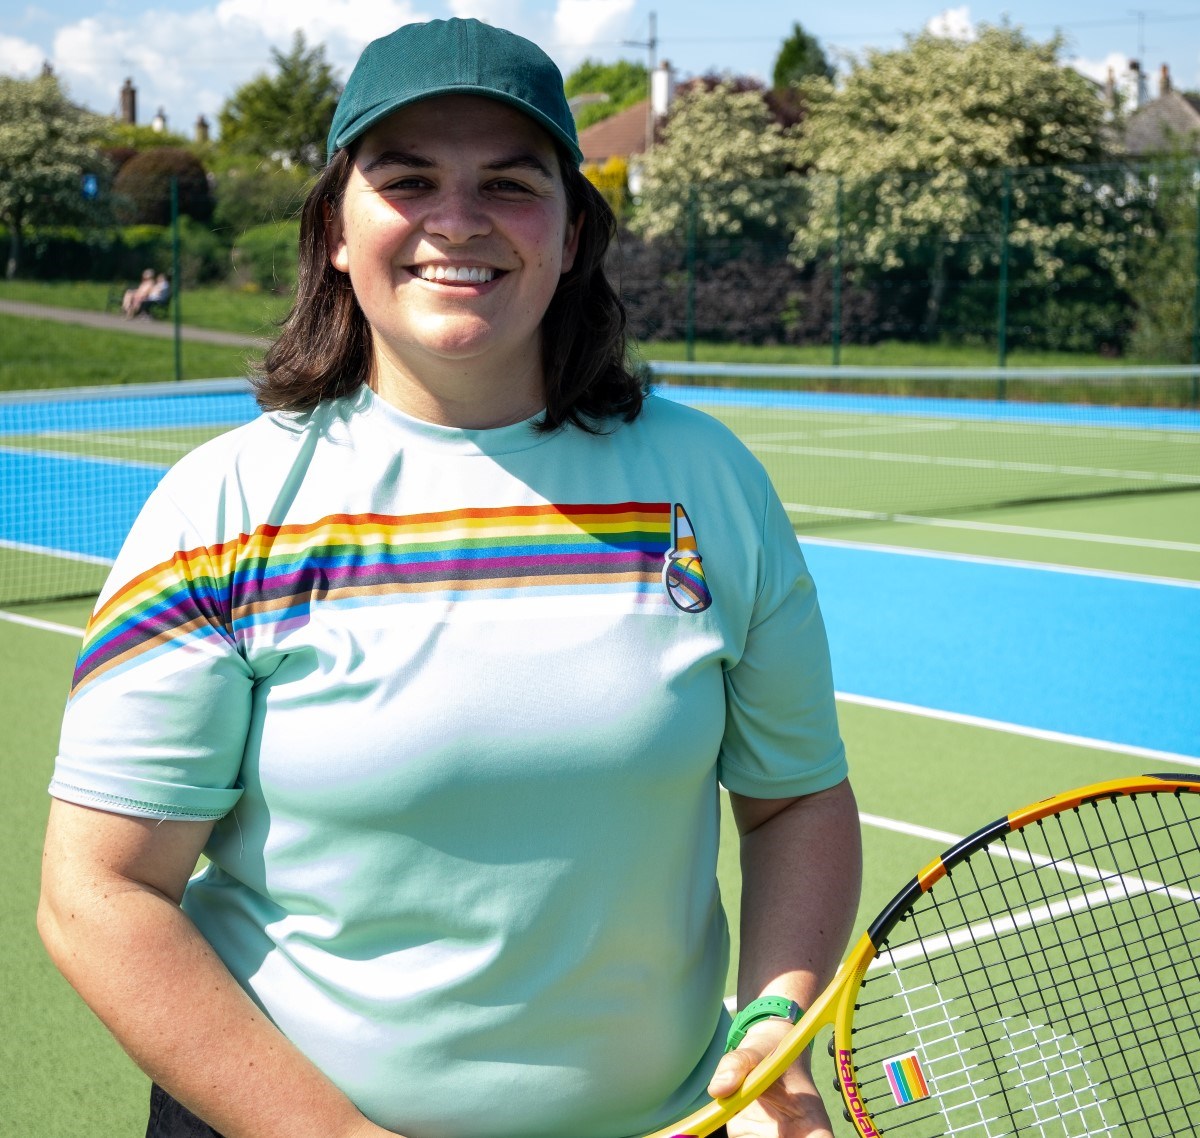 A woman stood on a tennis court smiling at the camera, wearing a blue t-shirt with a rainbow across the front, holding a yellow tennis racket in her hands